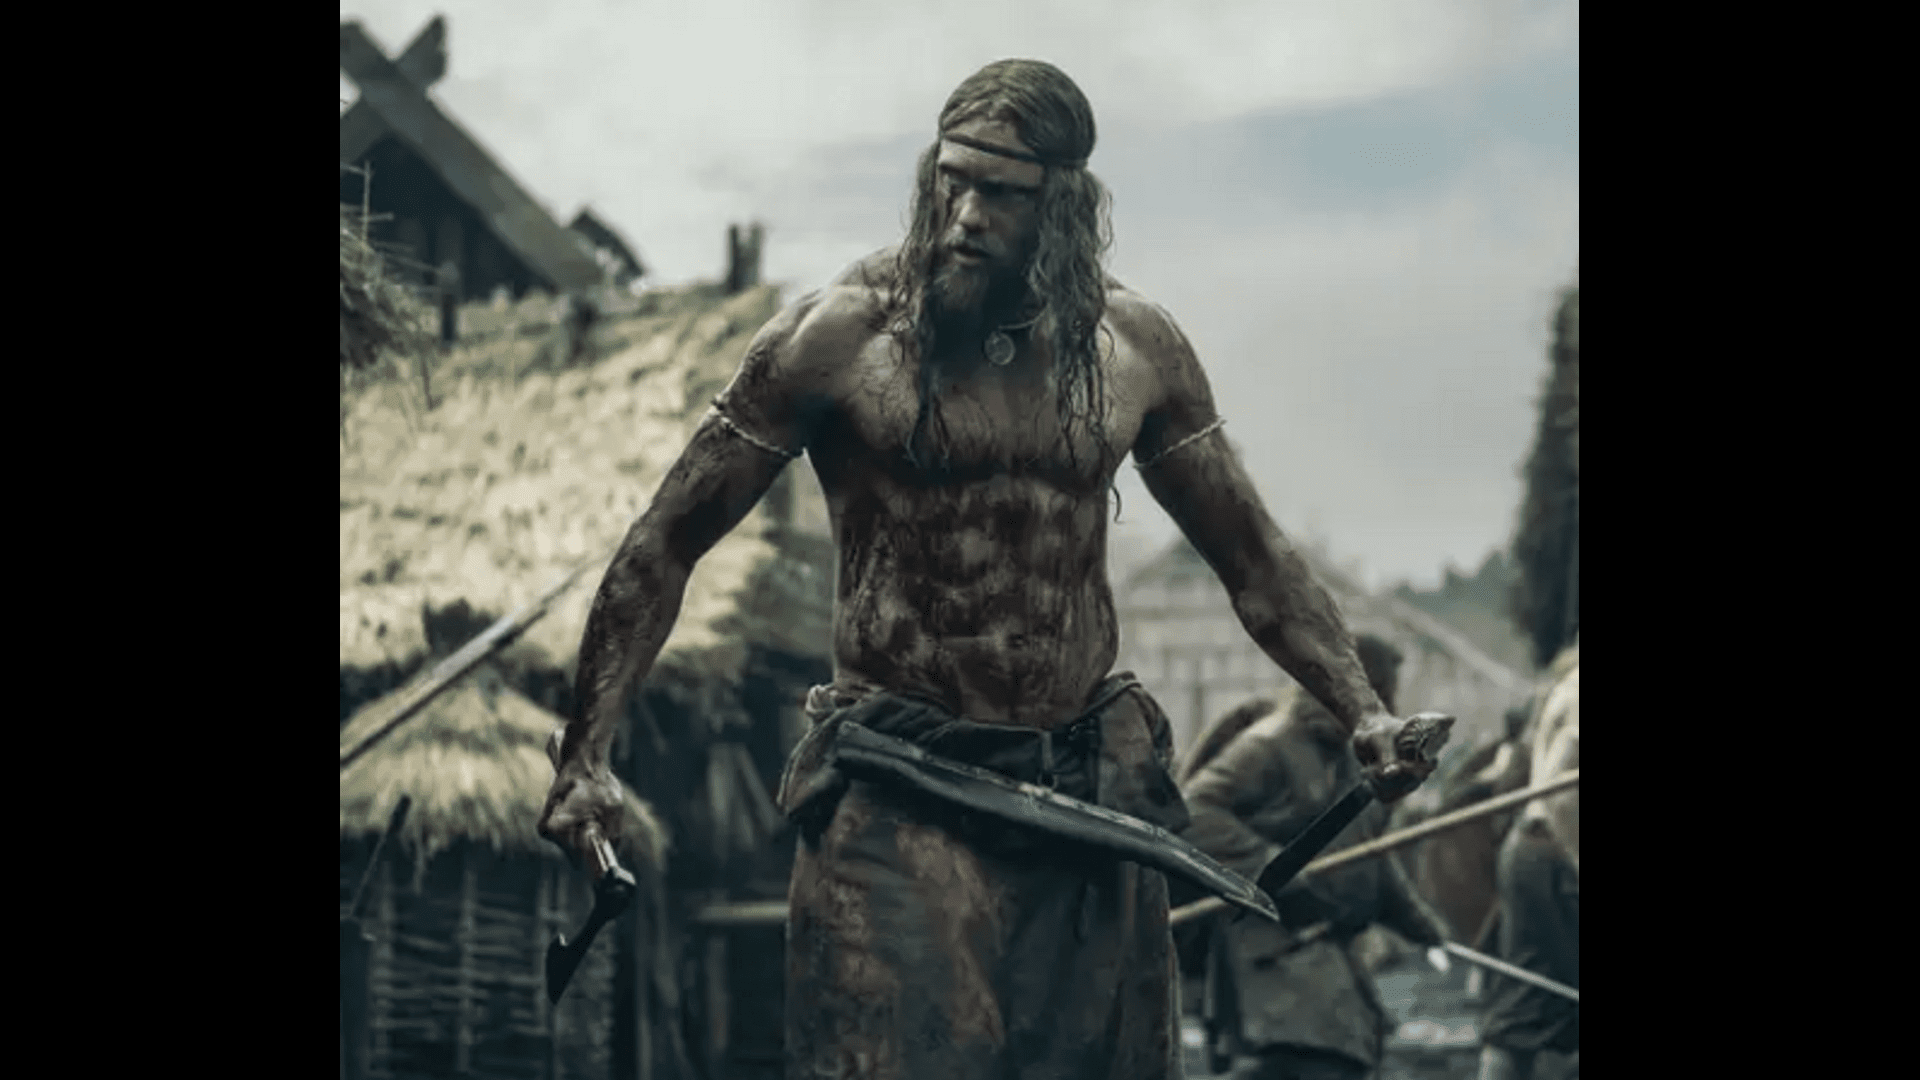 Alexander Skarsgard gained 9 kilograms for the role of a Viking in the film 'Northman